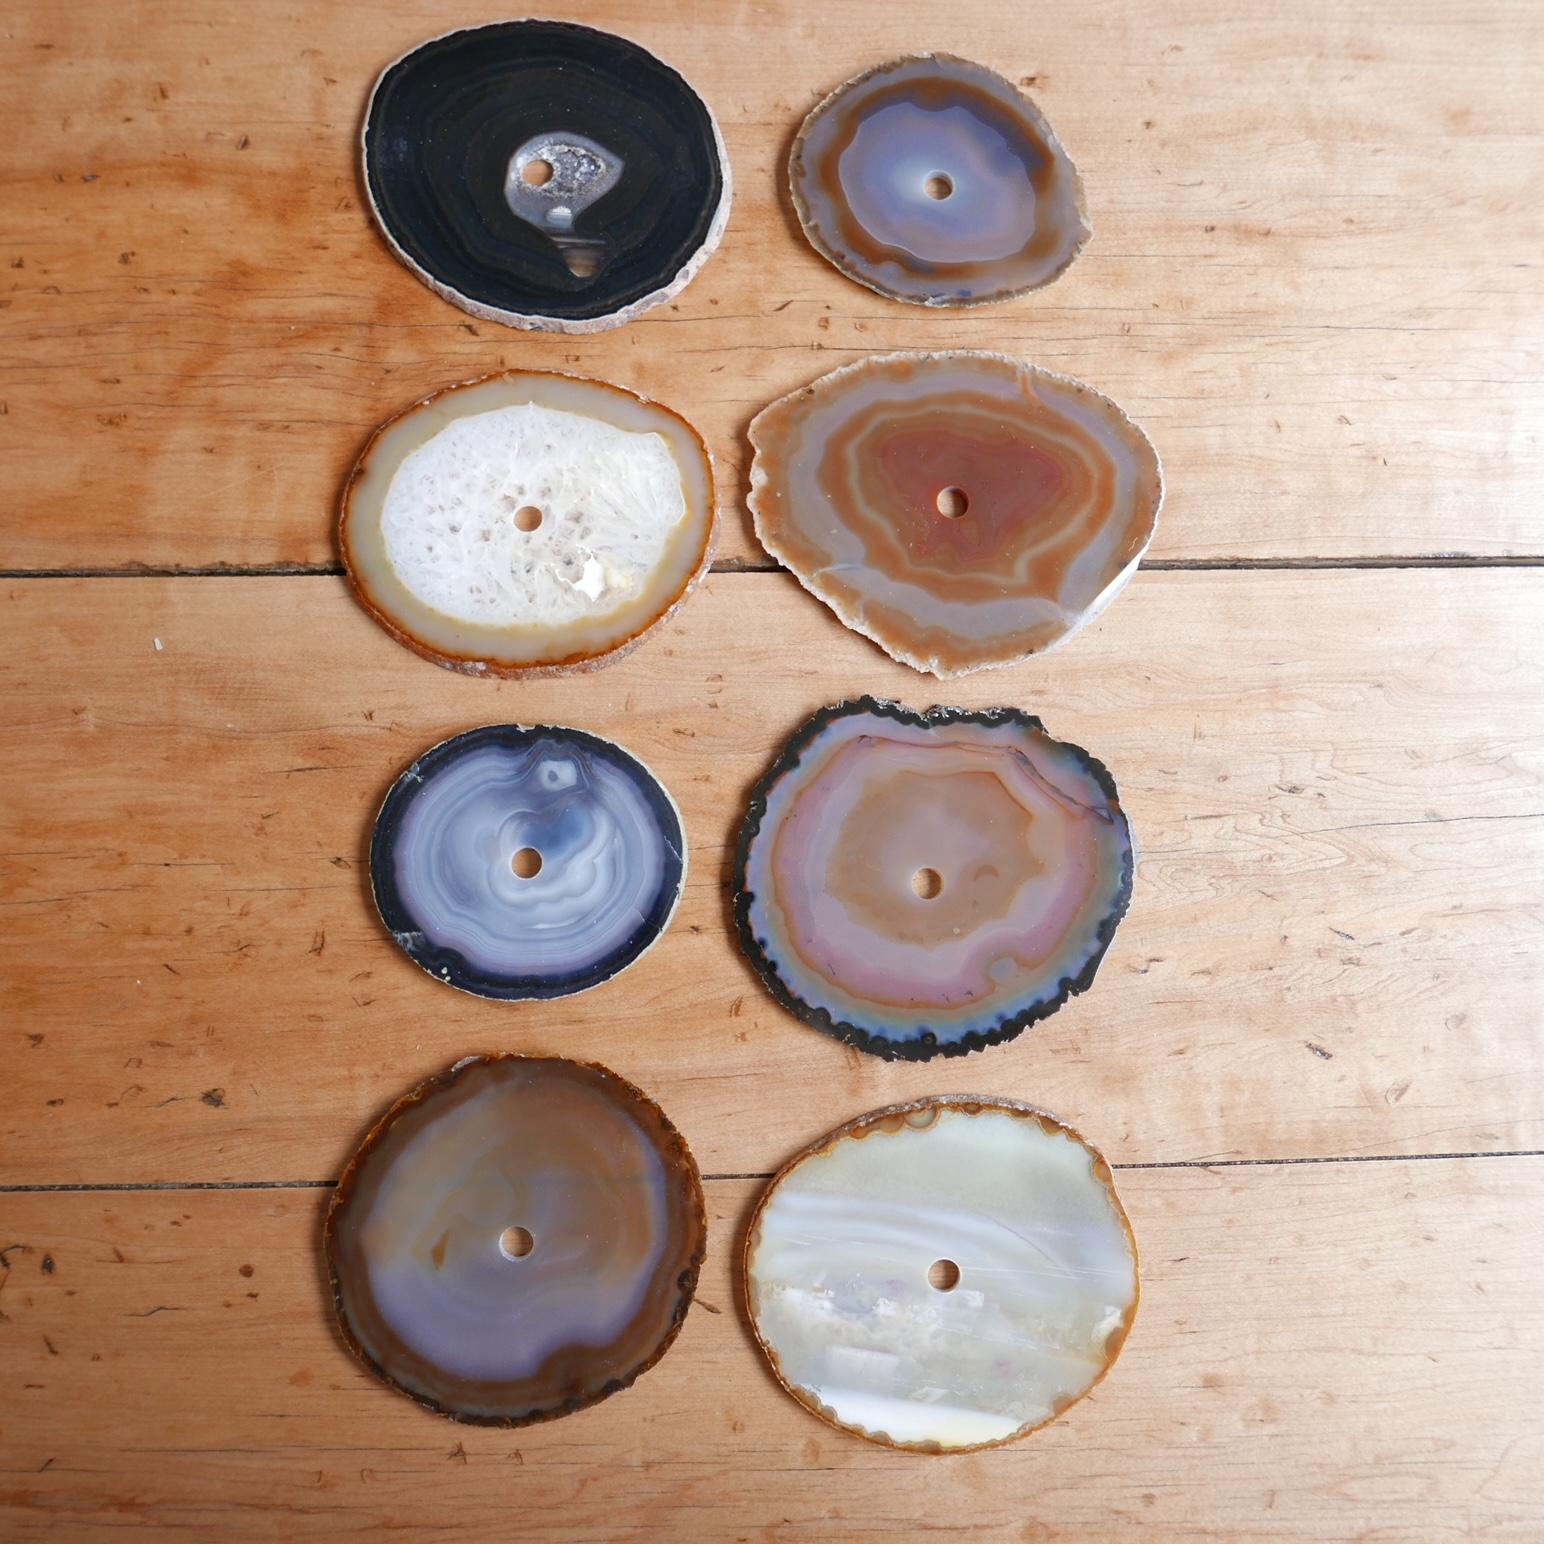 A set of natural stone circular drink place mats or coasters. Likely Agates. 

France, c1970s.

A variety of colours and stone specimens.

All have a circular hole in the centre presumably to mount on a rod for storage. But said rod is